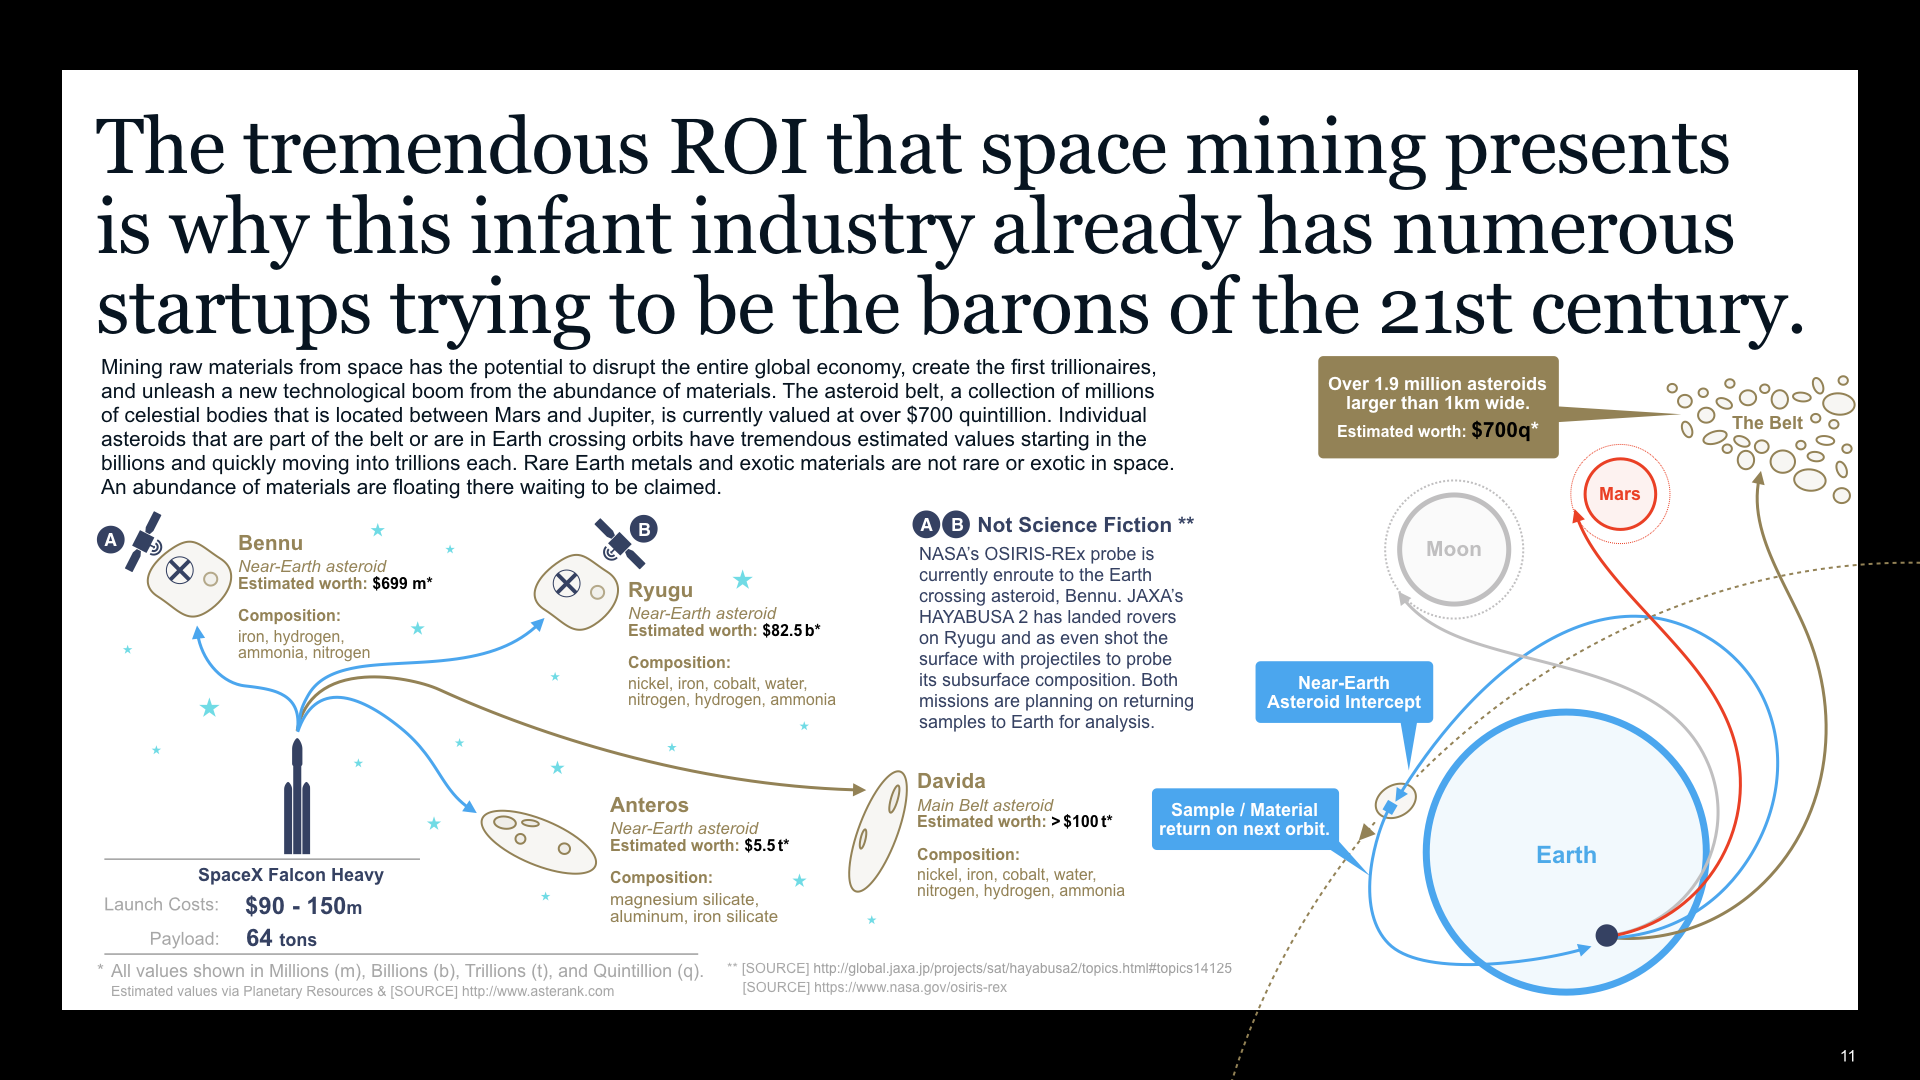 McKinsey_SpaceEconomy2019_MINING_overview_v019.011.png